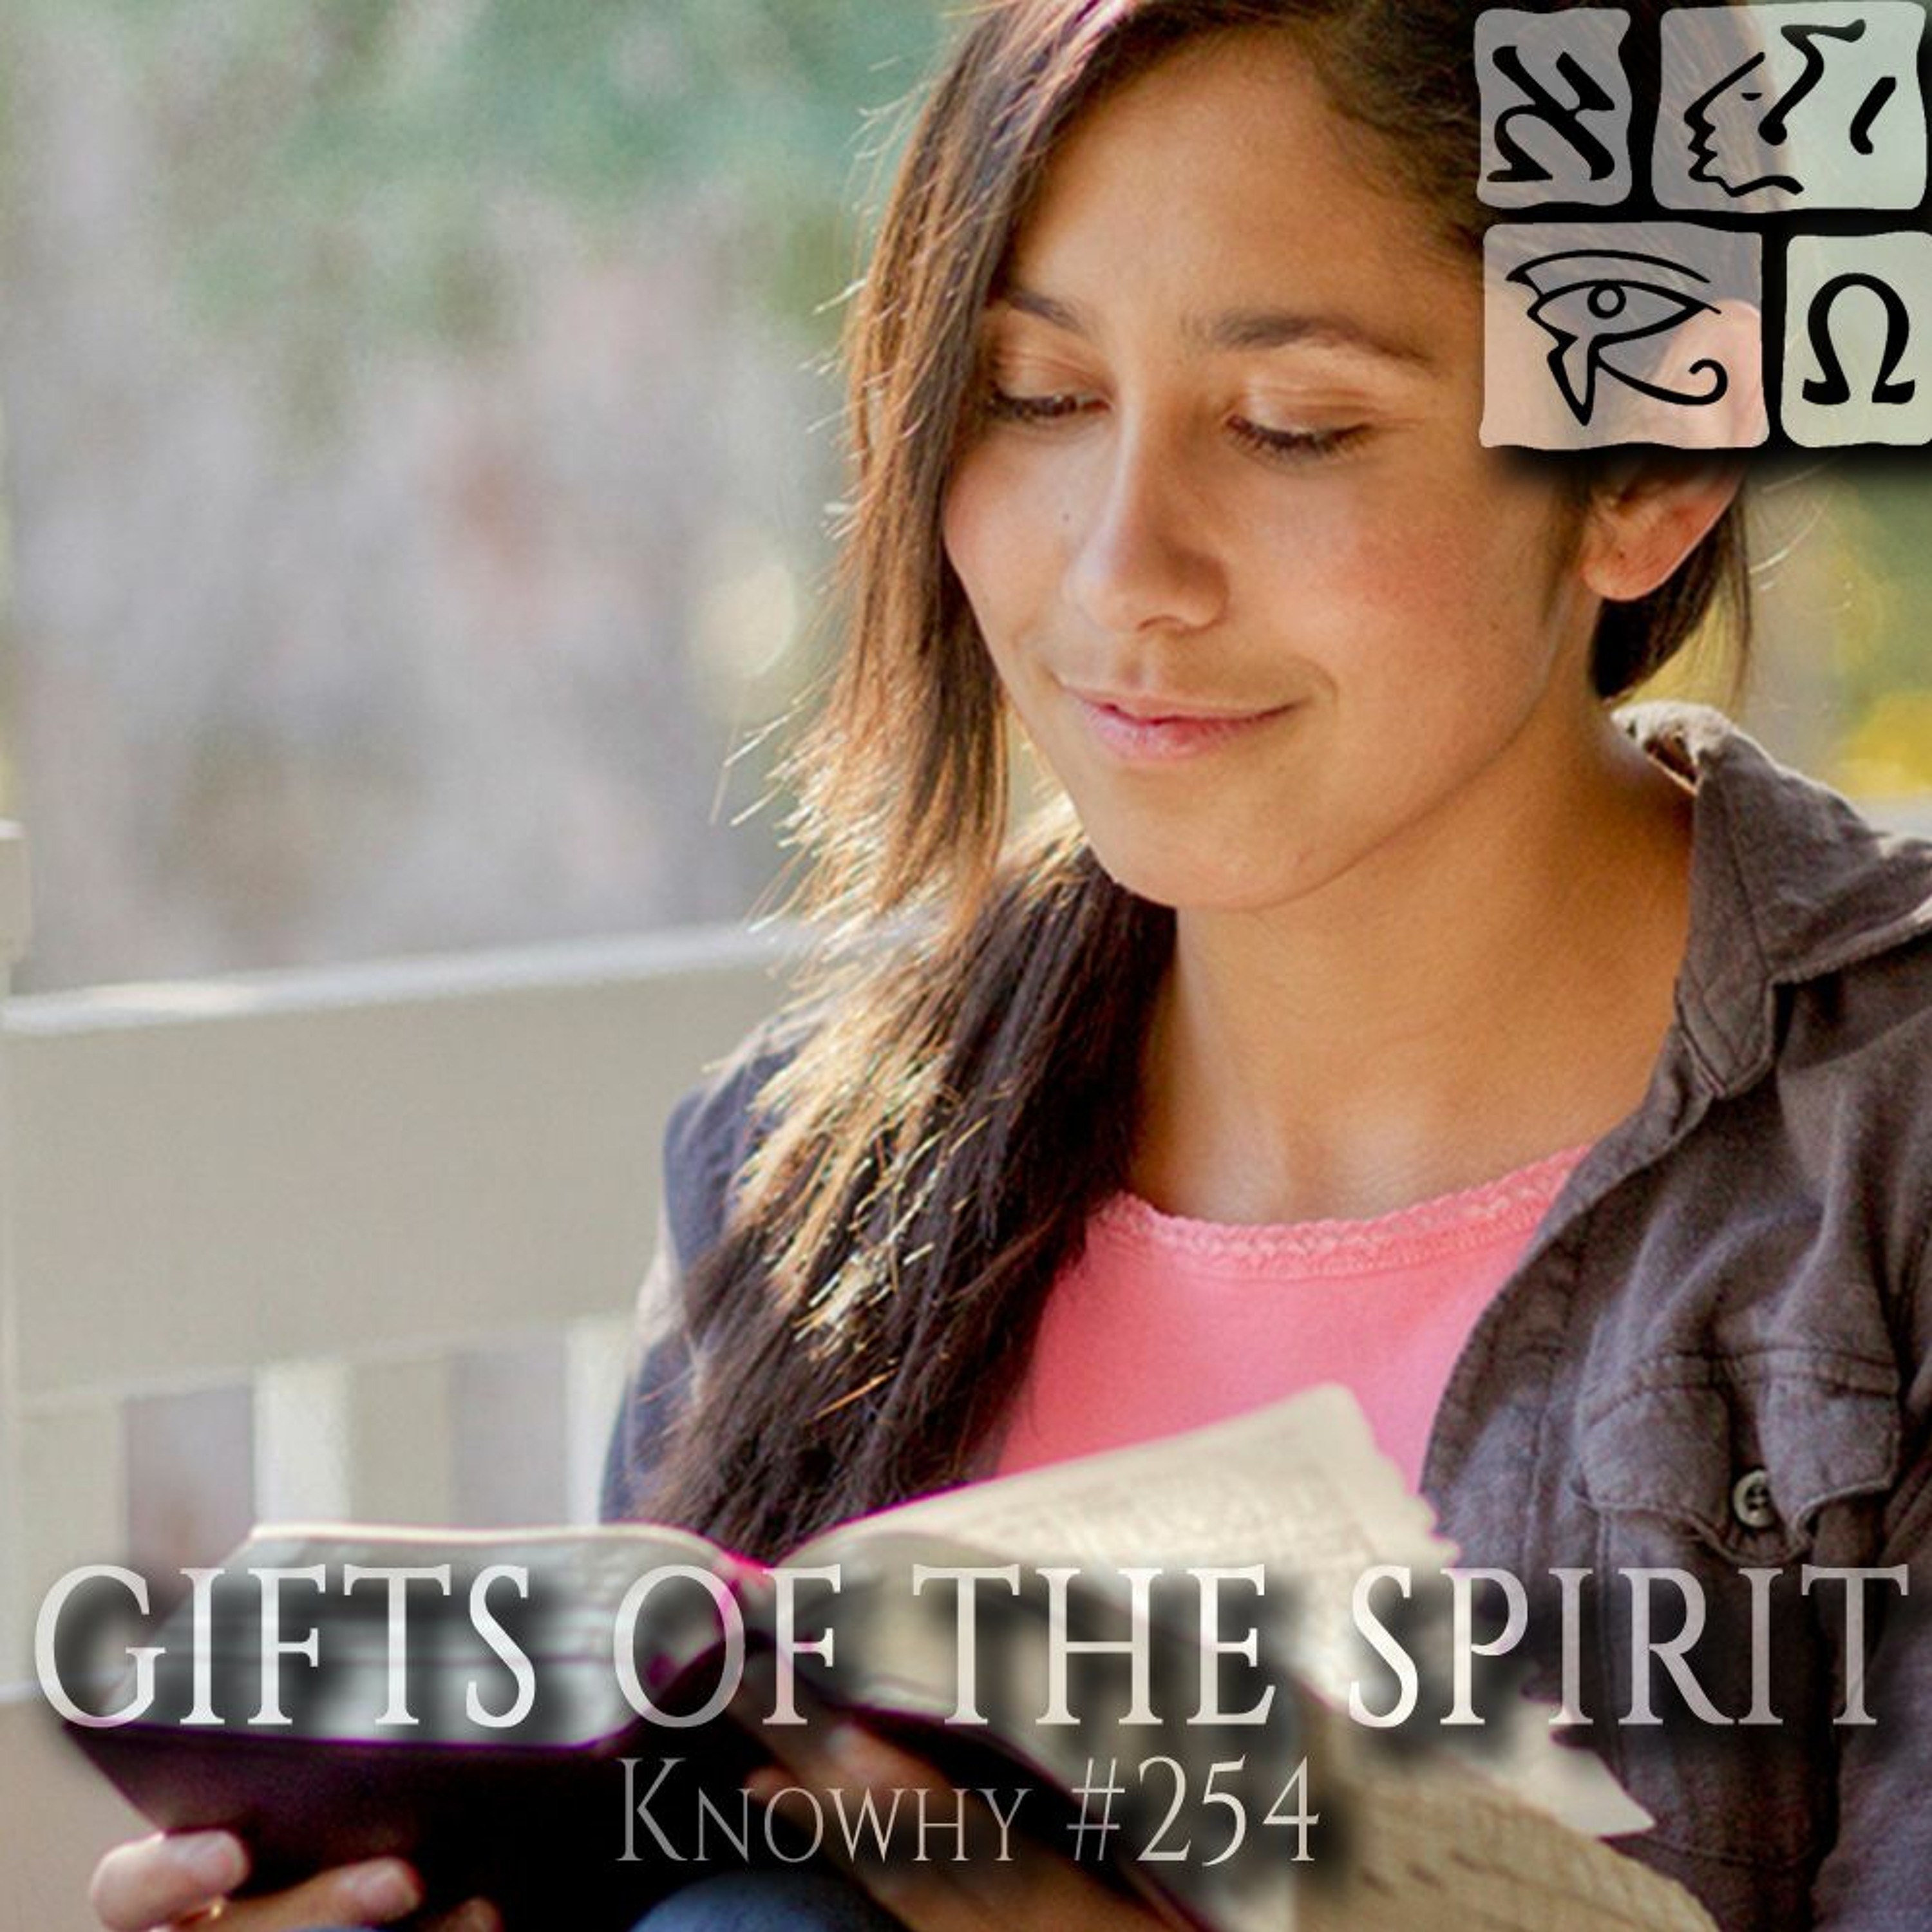 How Will God Manifest The Truth Of The Book Of Mormon? #254